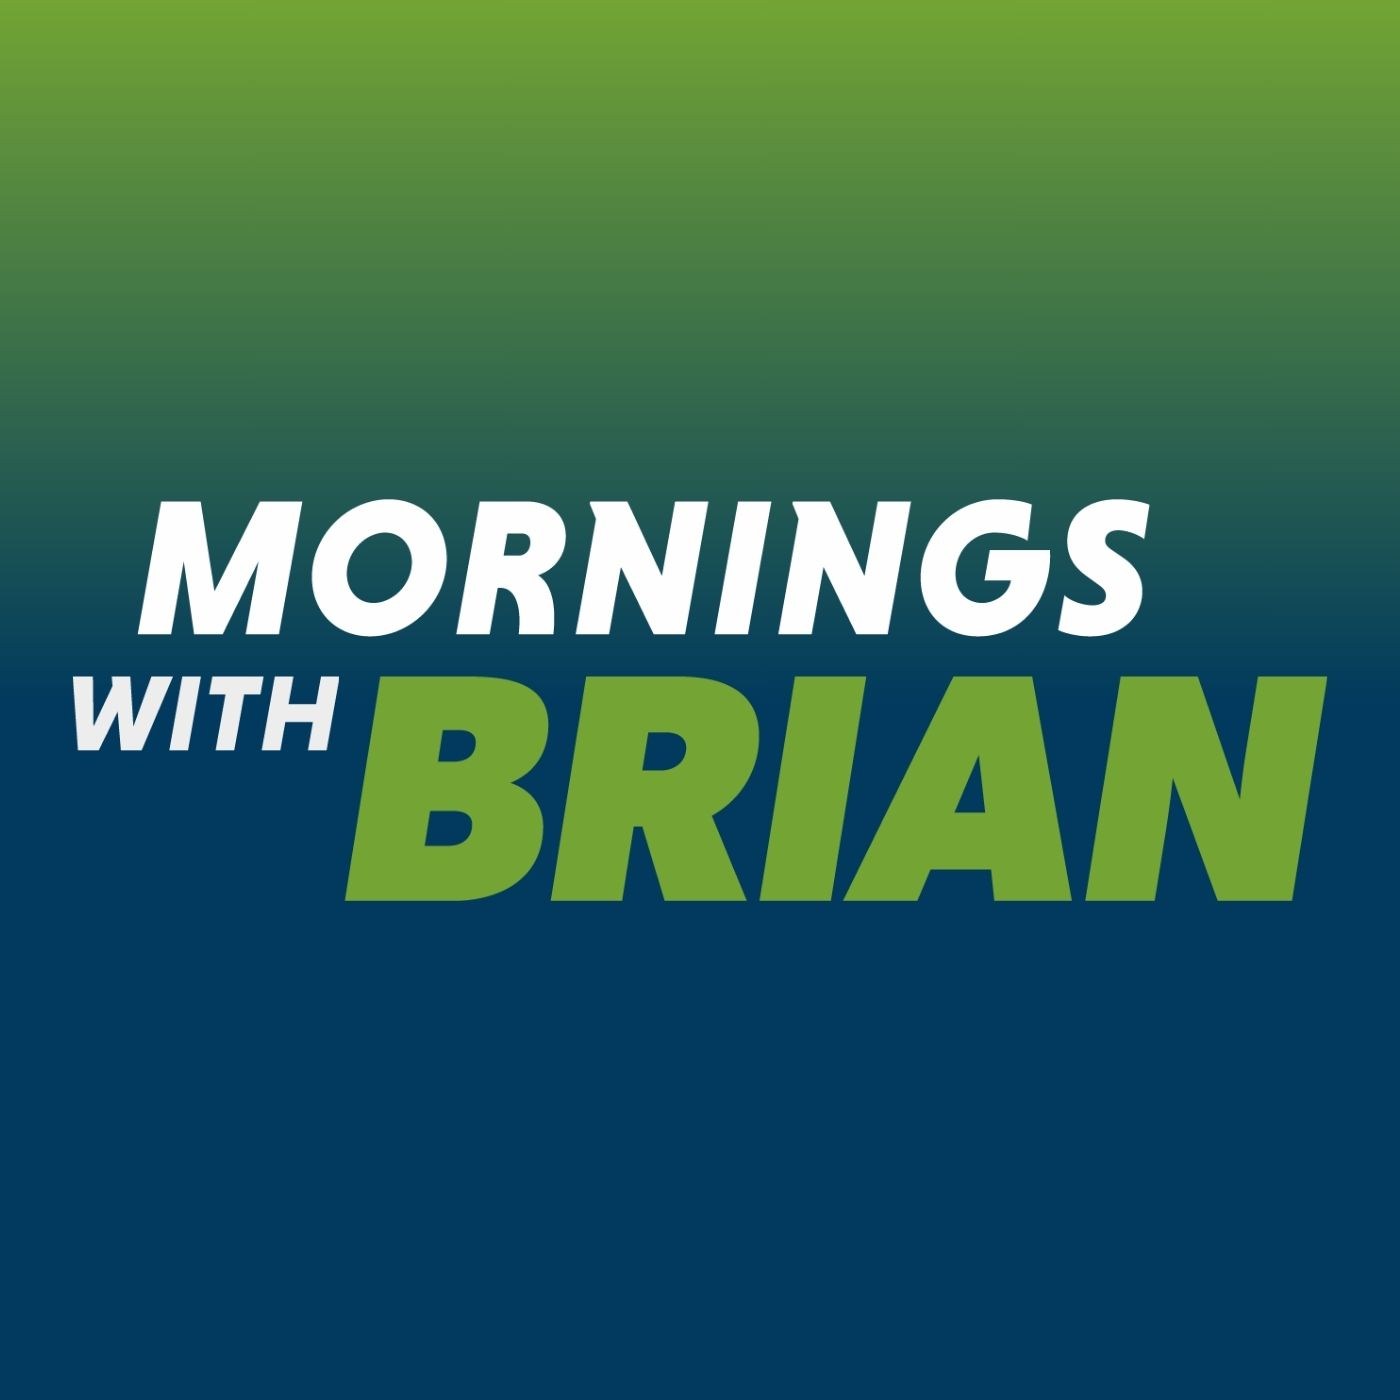 Mornings with Brian